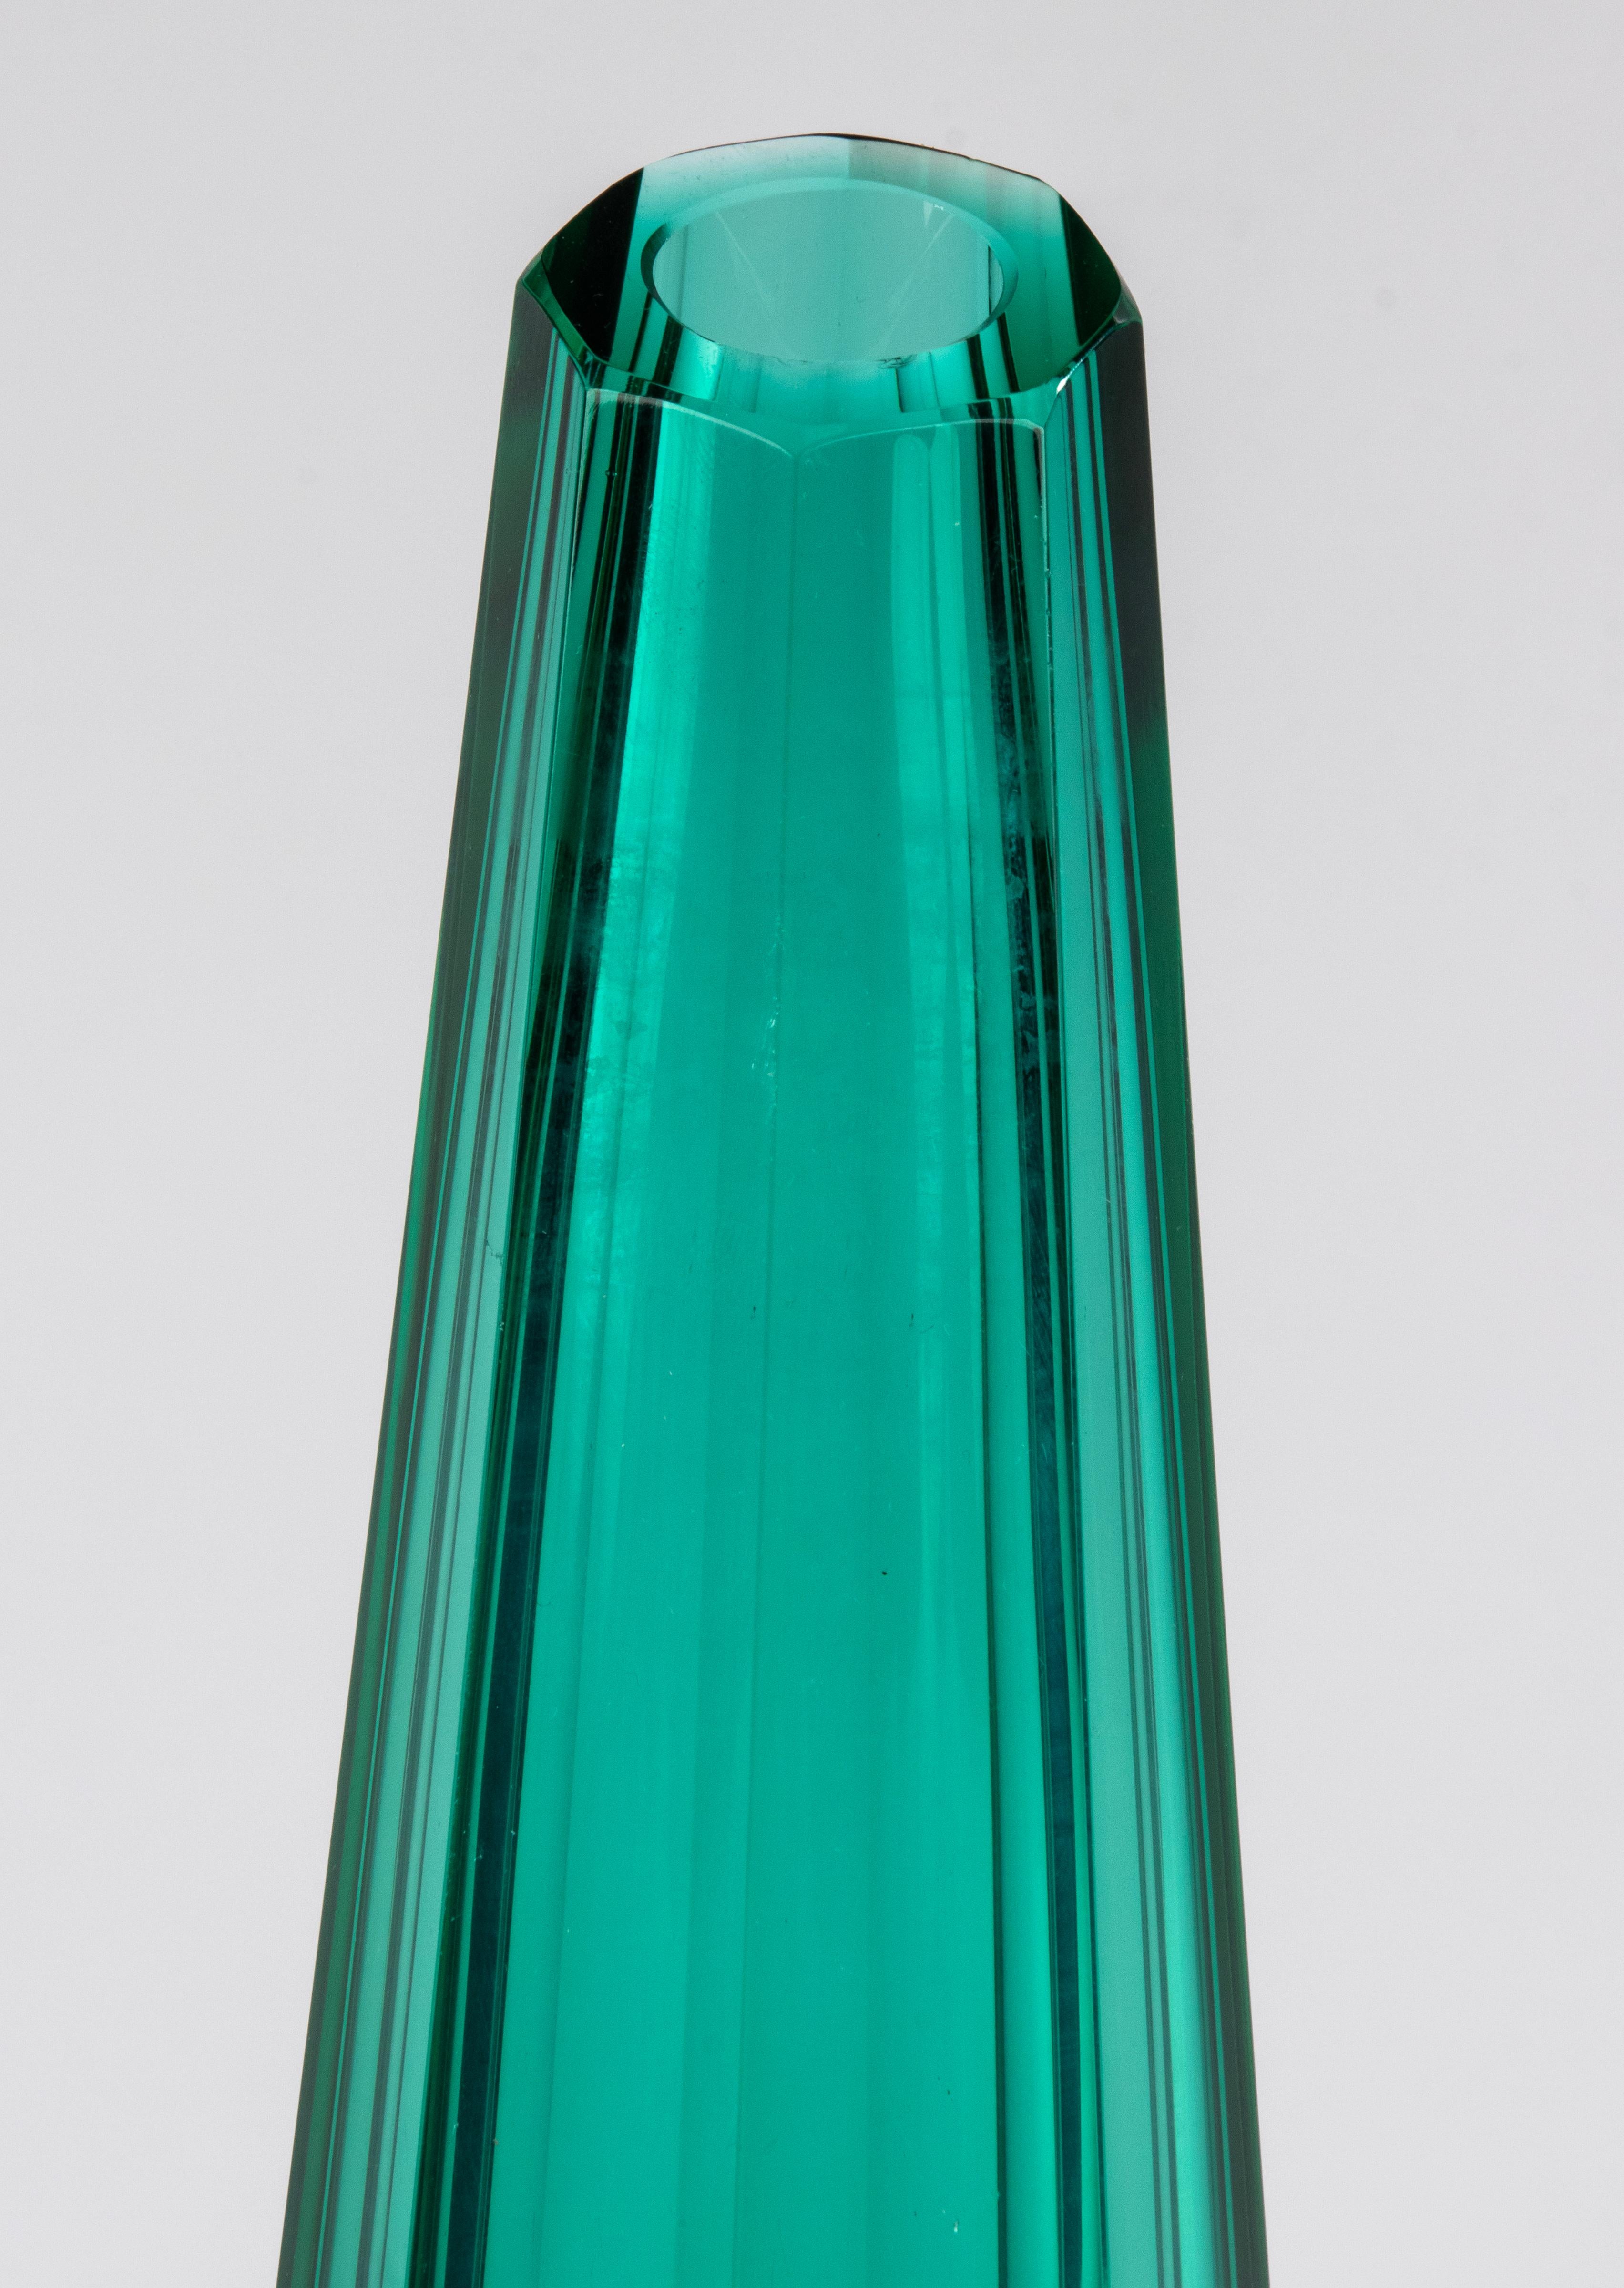 1930's Art Deco Crystal Vase - Attributed to Josef Hoffmann for Moser In Good Condition For Sale In Casteren, Noord-Brabant